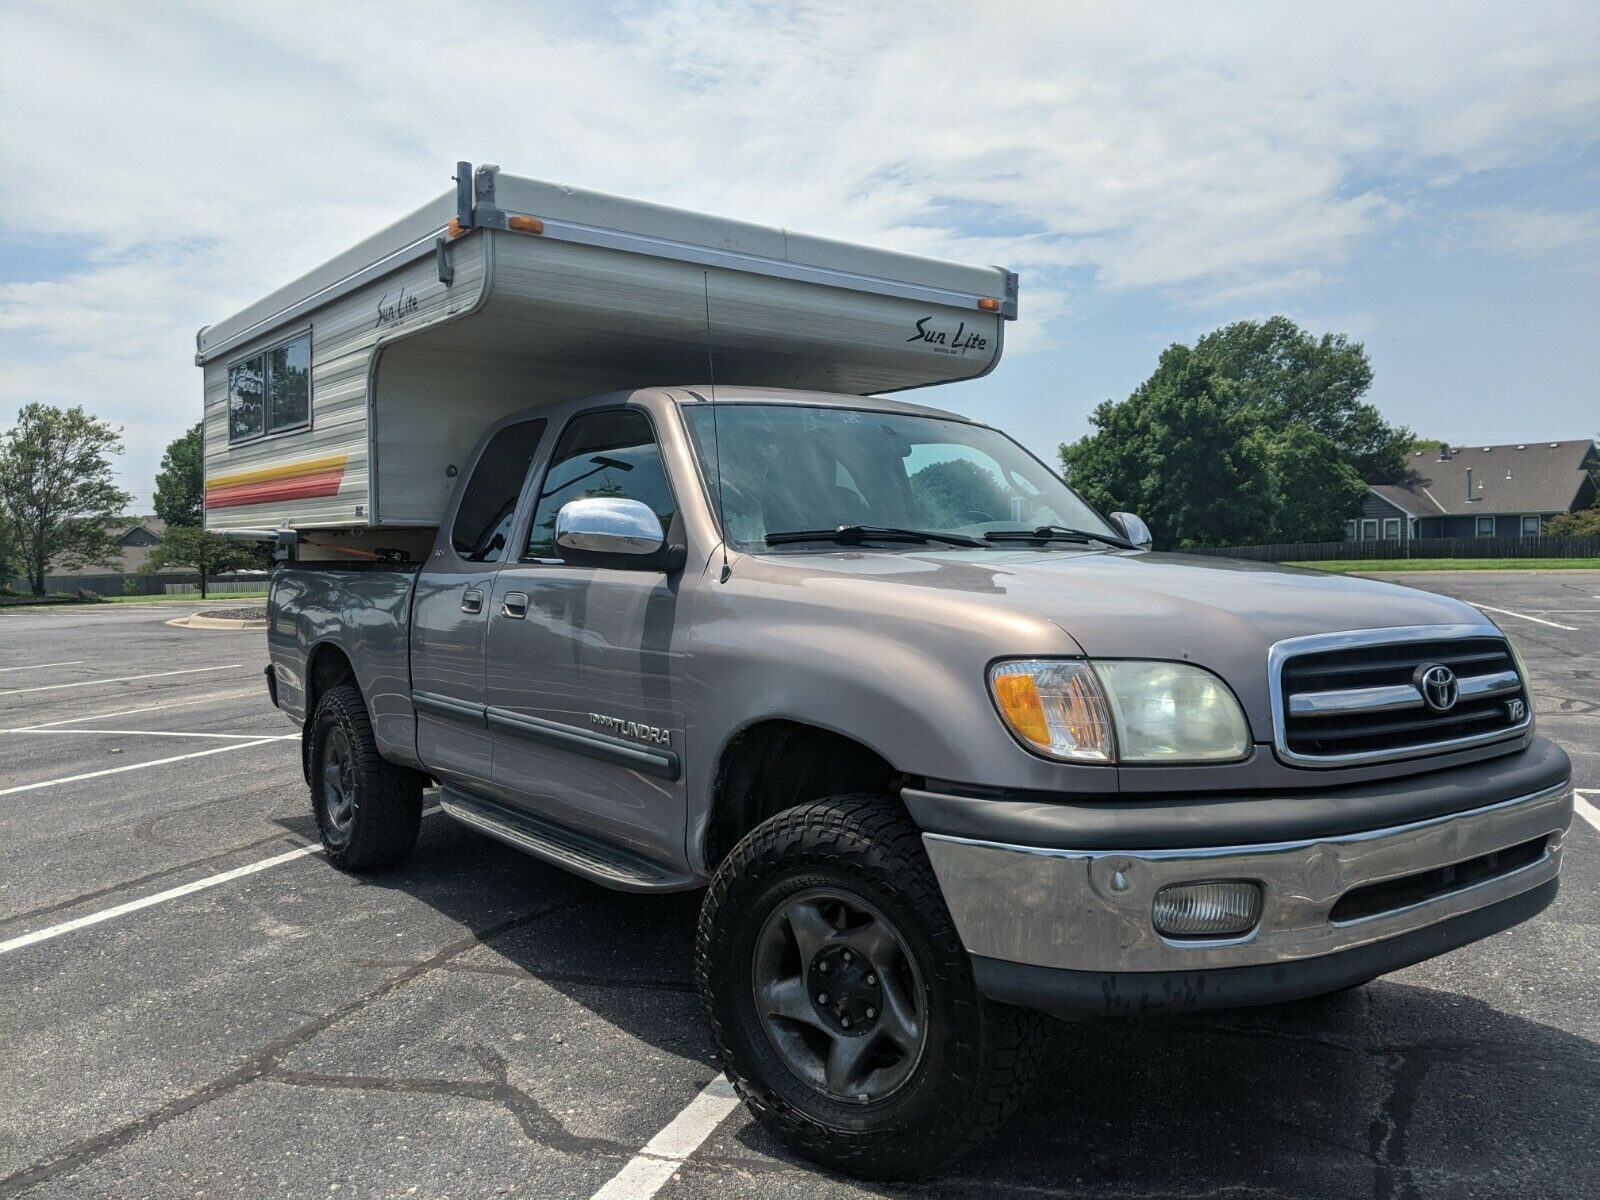 2000 Toyota Tundra Sr5 4x4 V8 With 1985 Sunlite Popup Camper